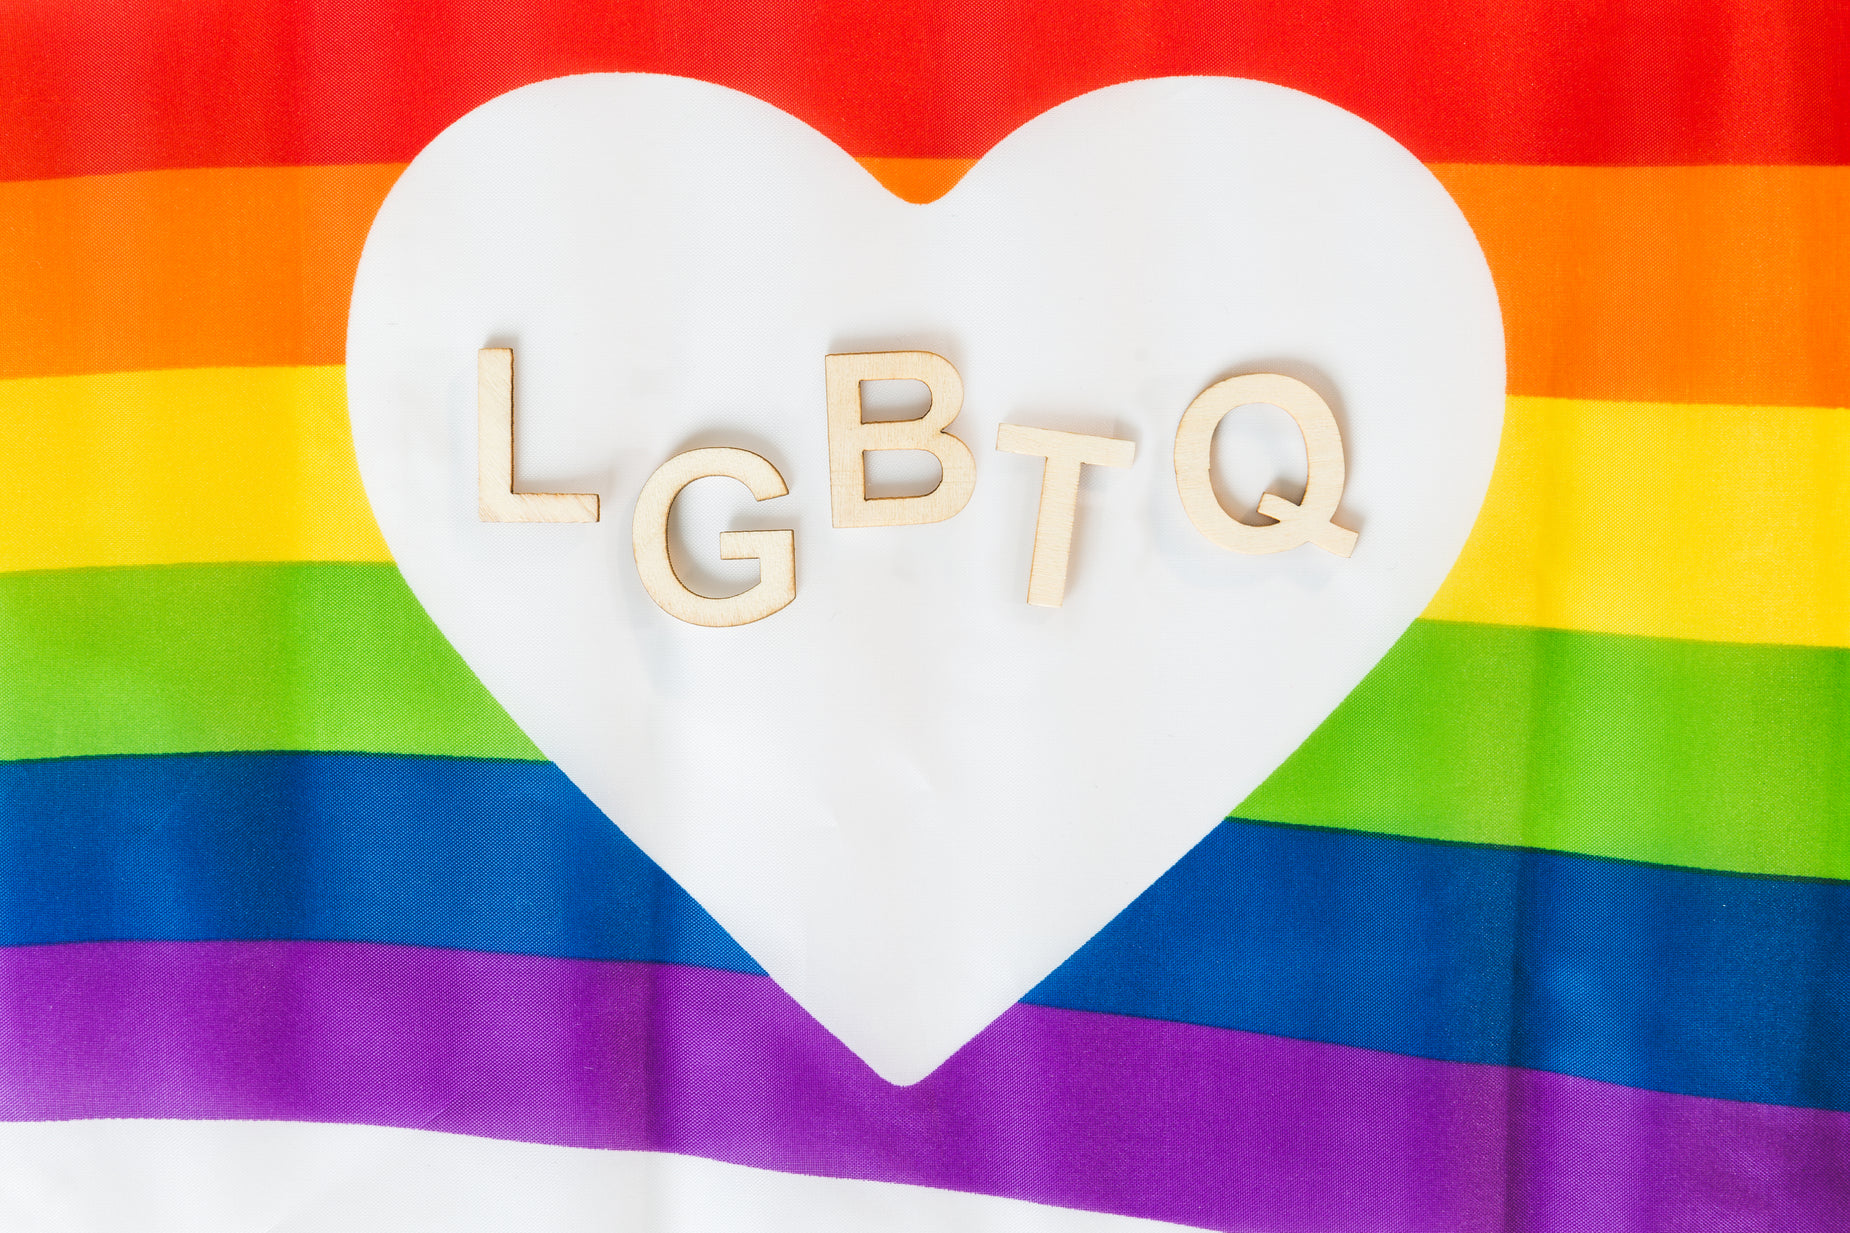 Browse Free HD Images of LGBTQ Letters In Heart Pride Flag